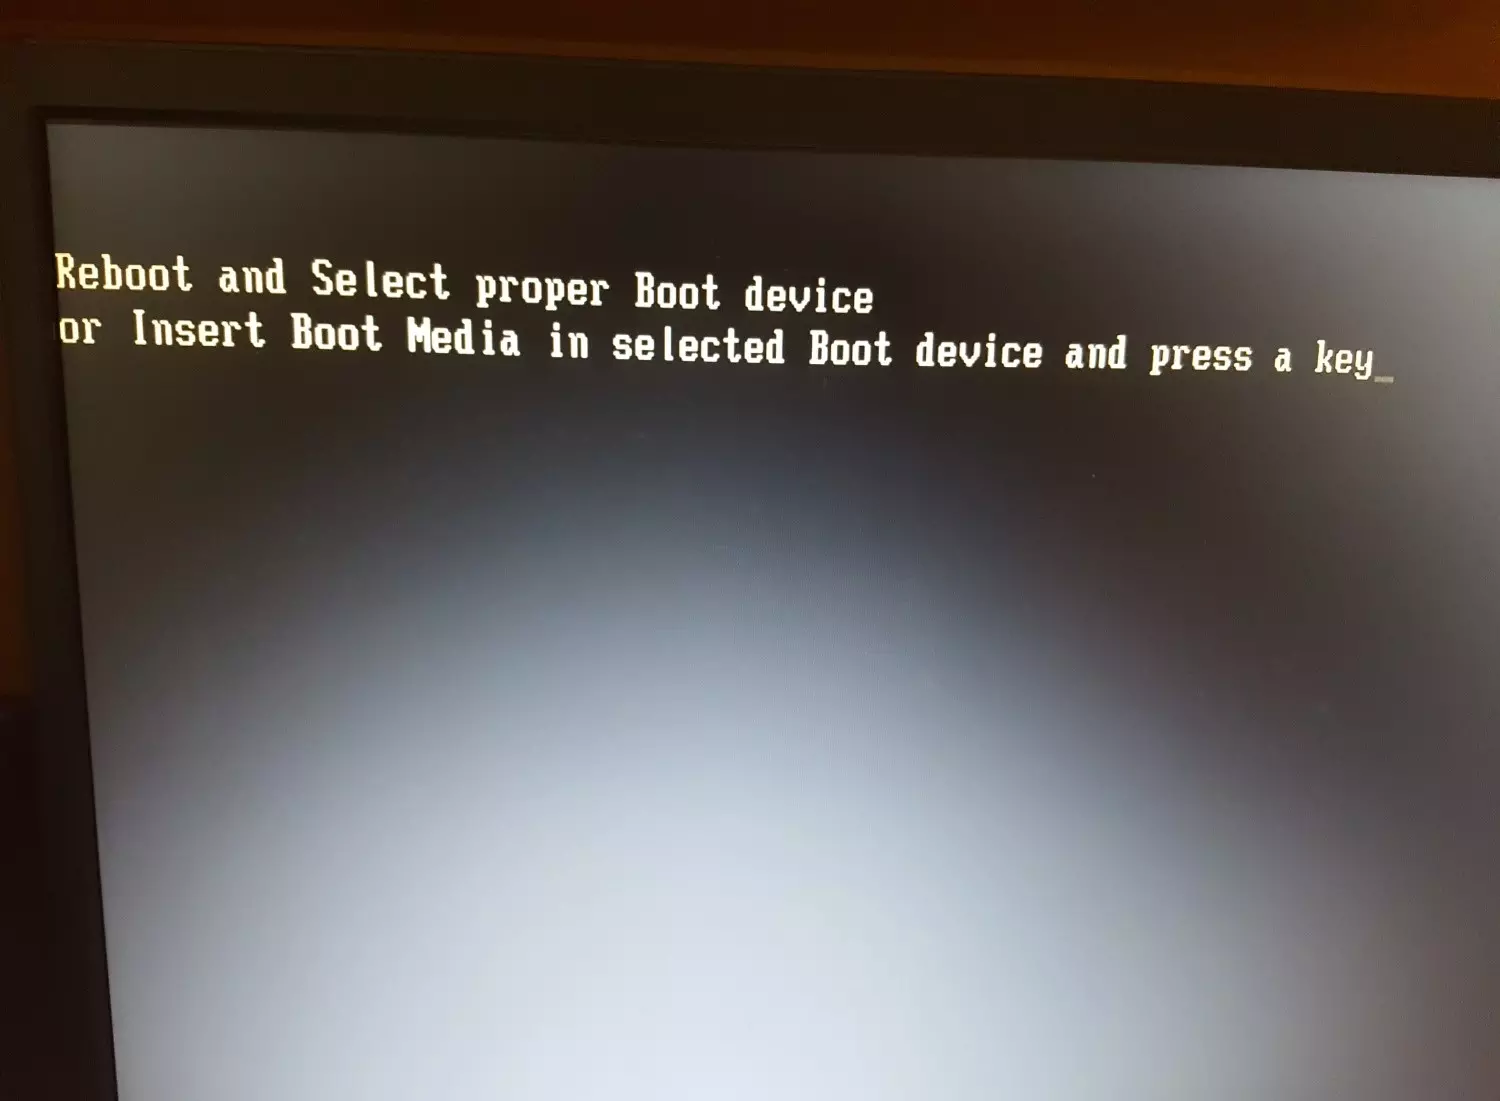 Reboot and select proper Boot device. Ошибка Reboot and select proper Boot device or Insert. Ошибка Reboot and select proper Boot device. Reboot and select proper Boot device and Press a Key. Если пишет device